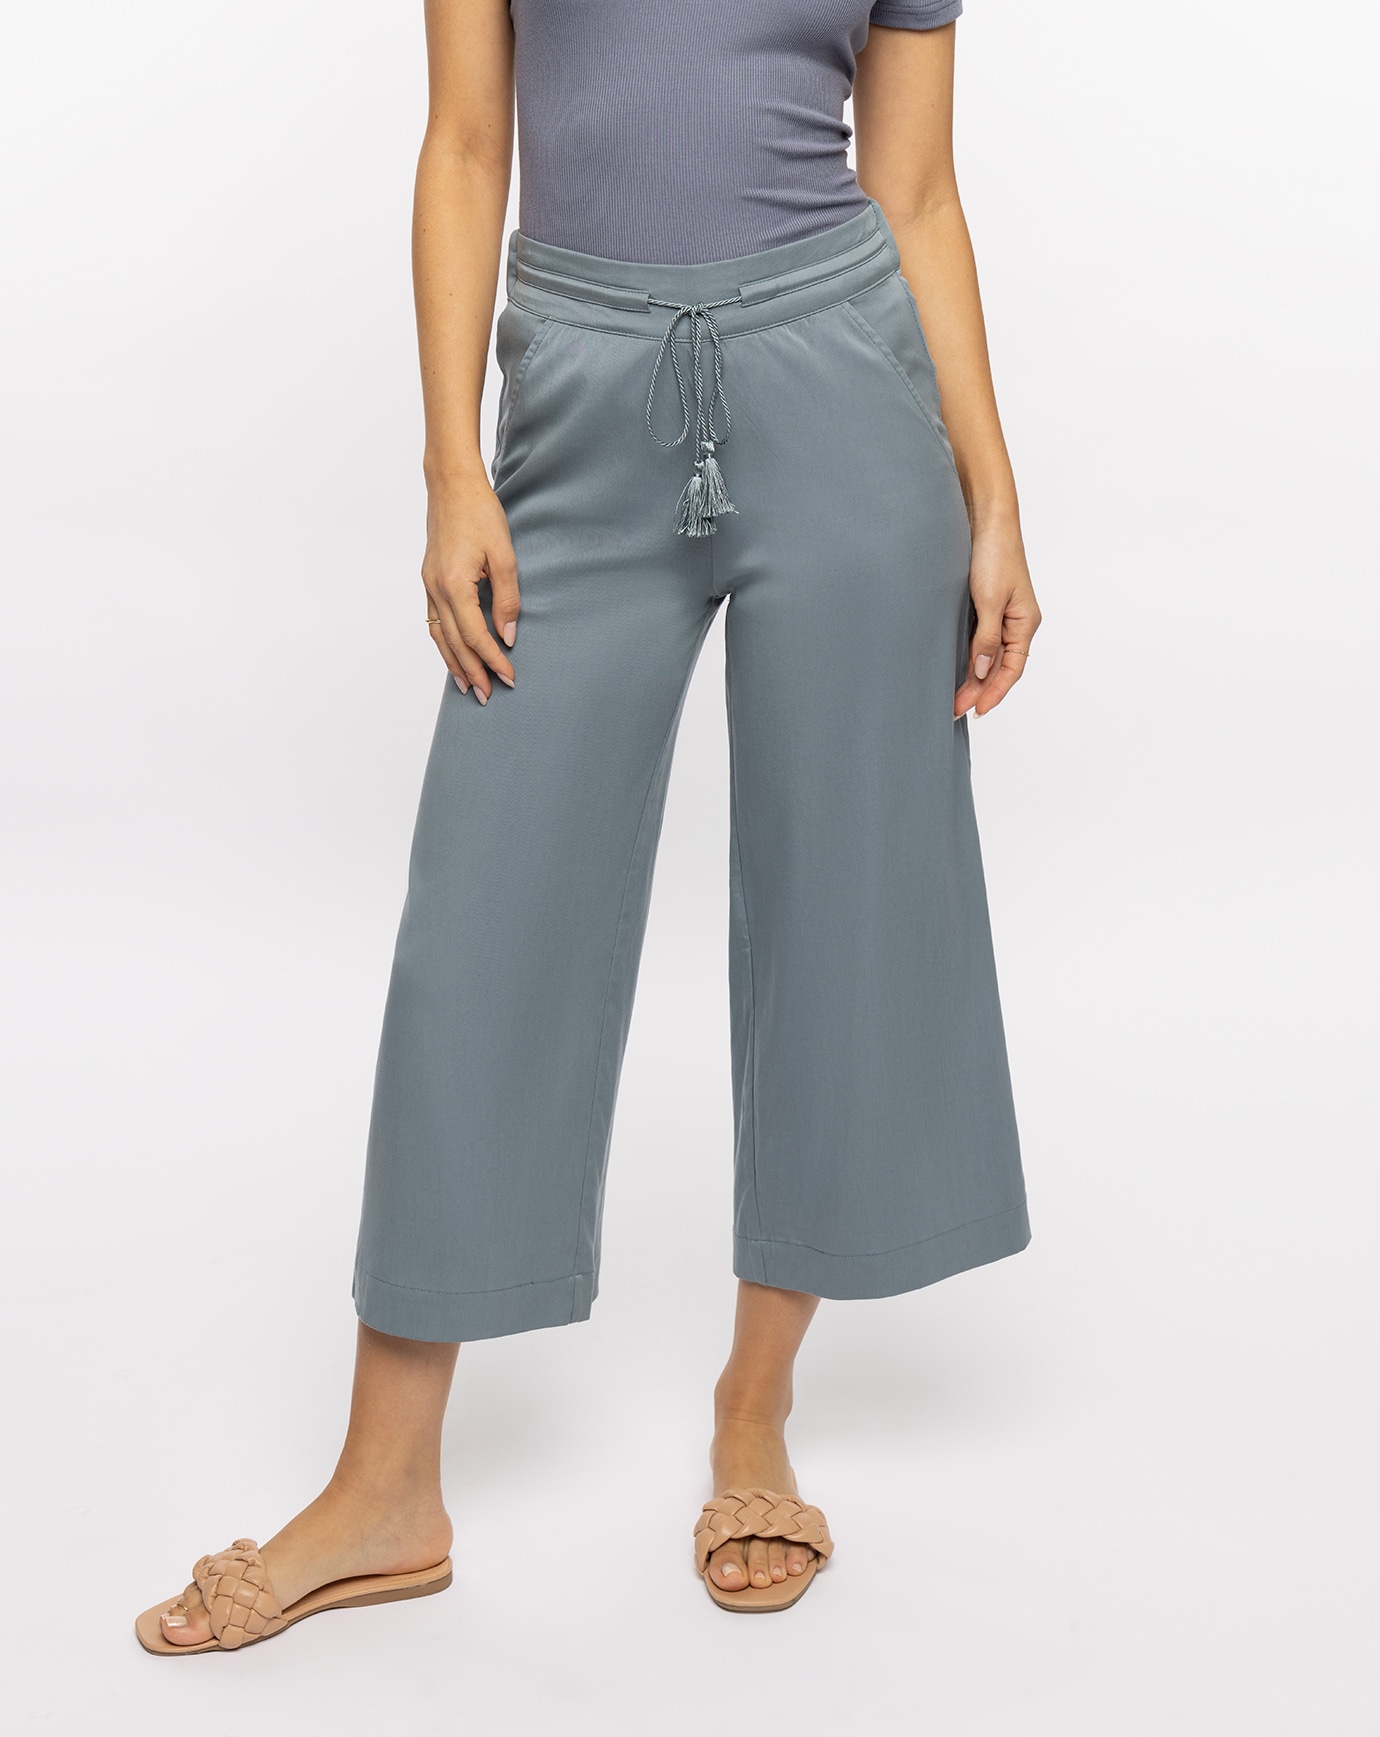 Related Product - CAPRI TIE FRONT PANT